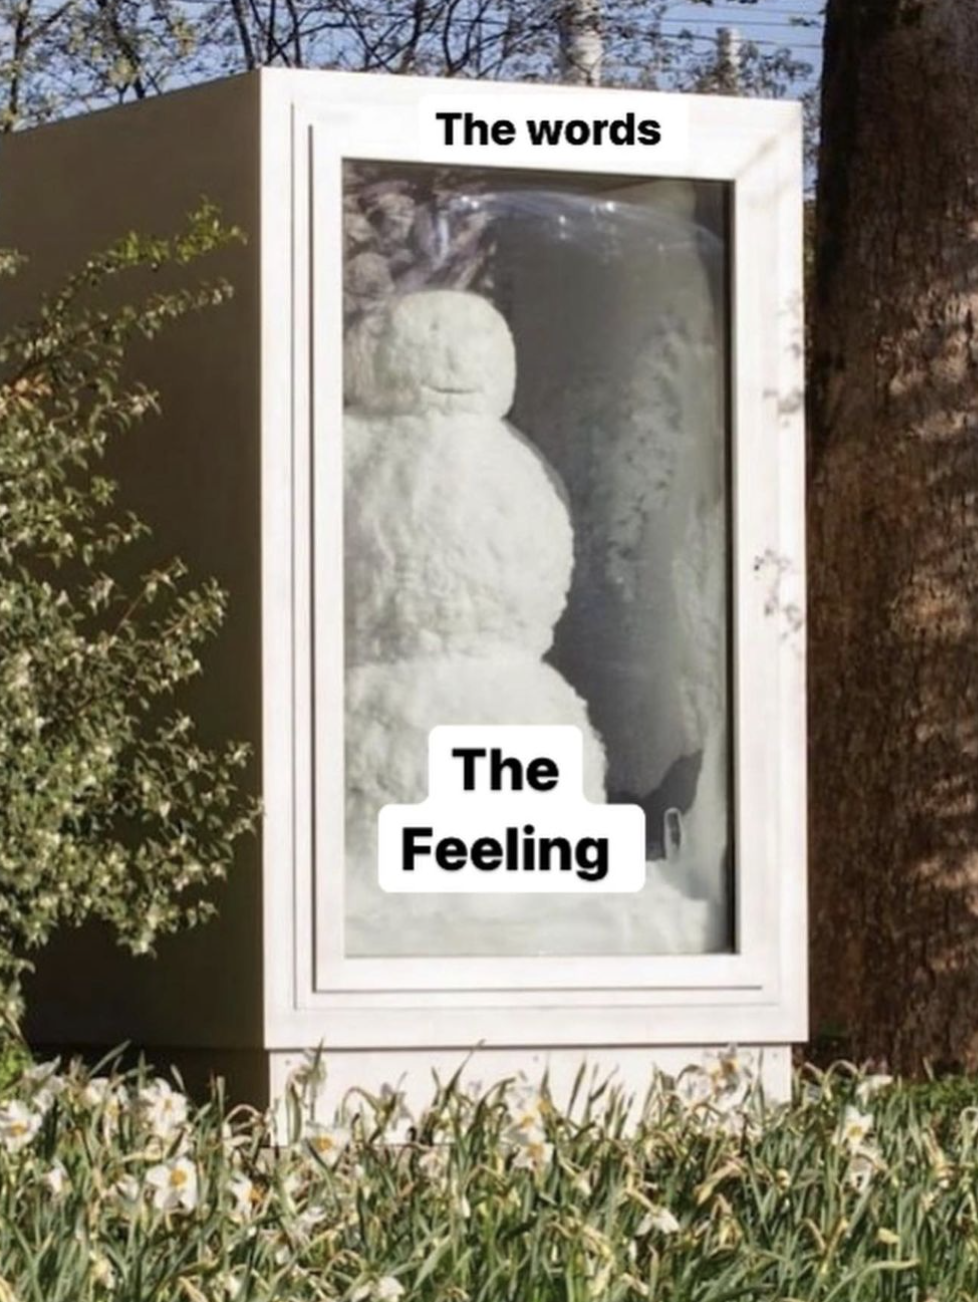 a snowman inside a box with a window. The box is labeled "the words", the snowman is labelled "the feeling"